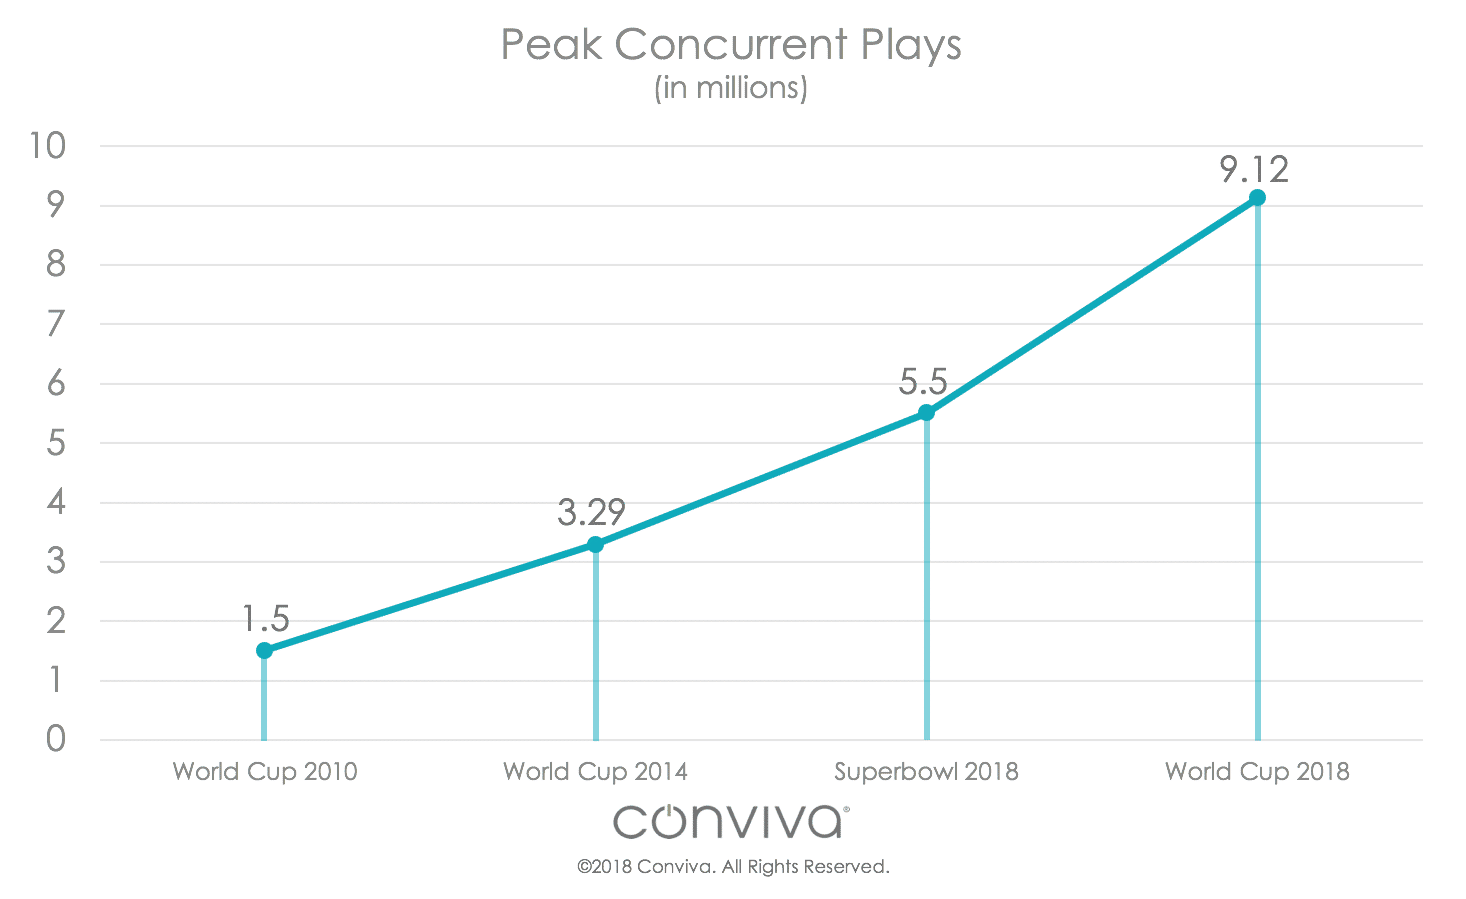 Line Graph Of World Cup Peak Concurrent Plays From 2010 To 2018